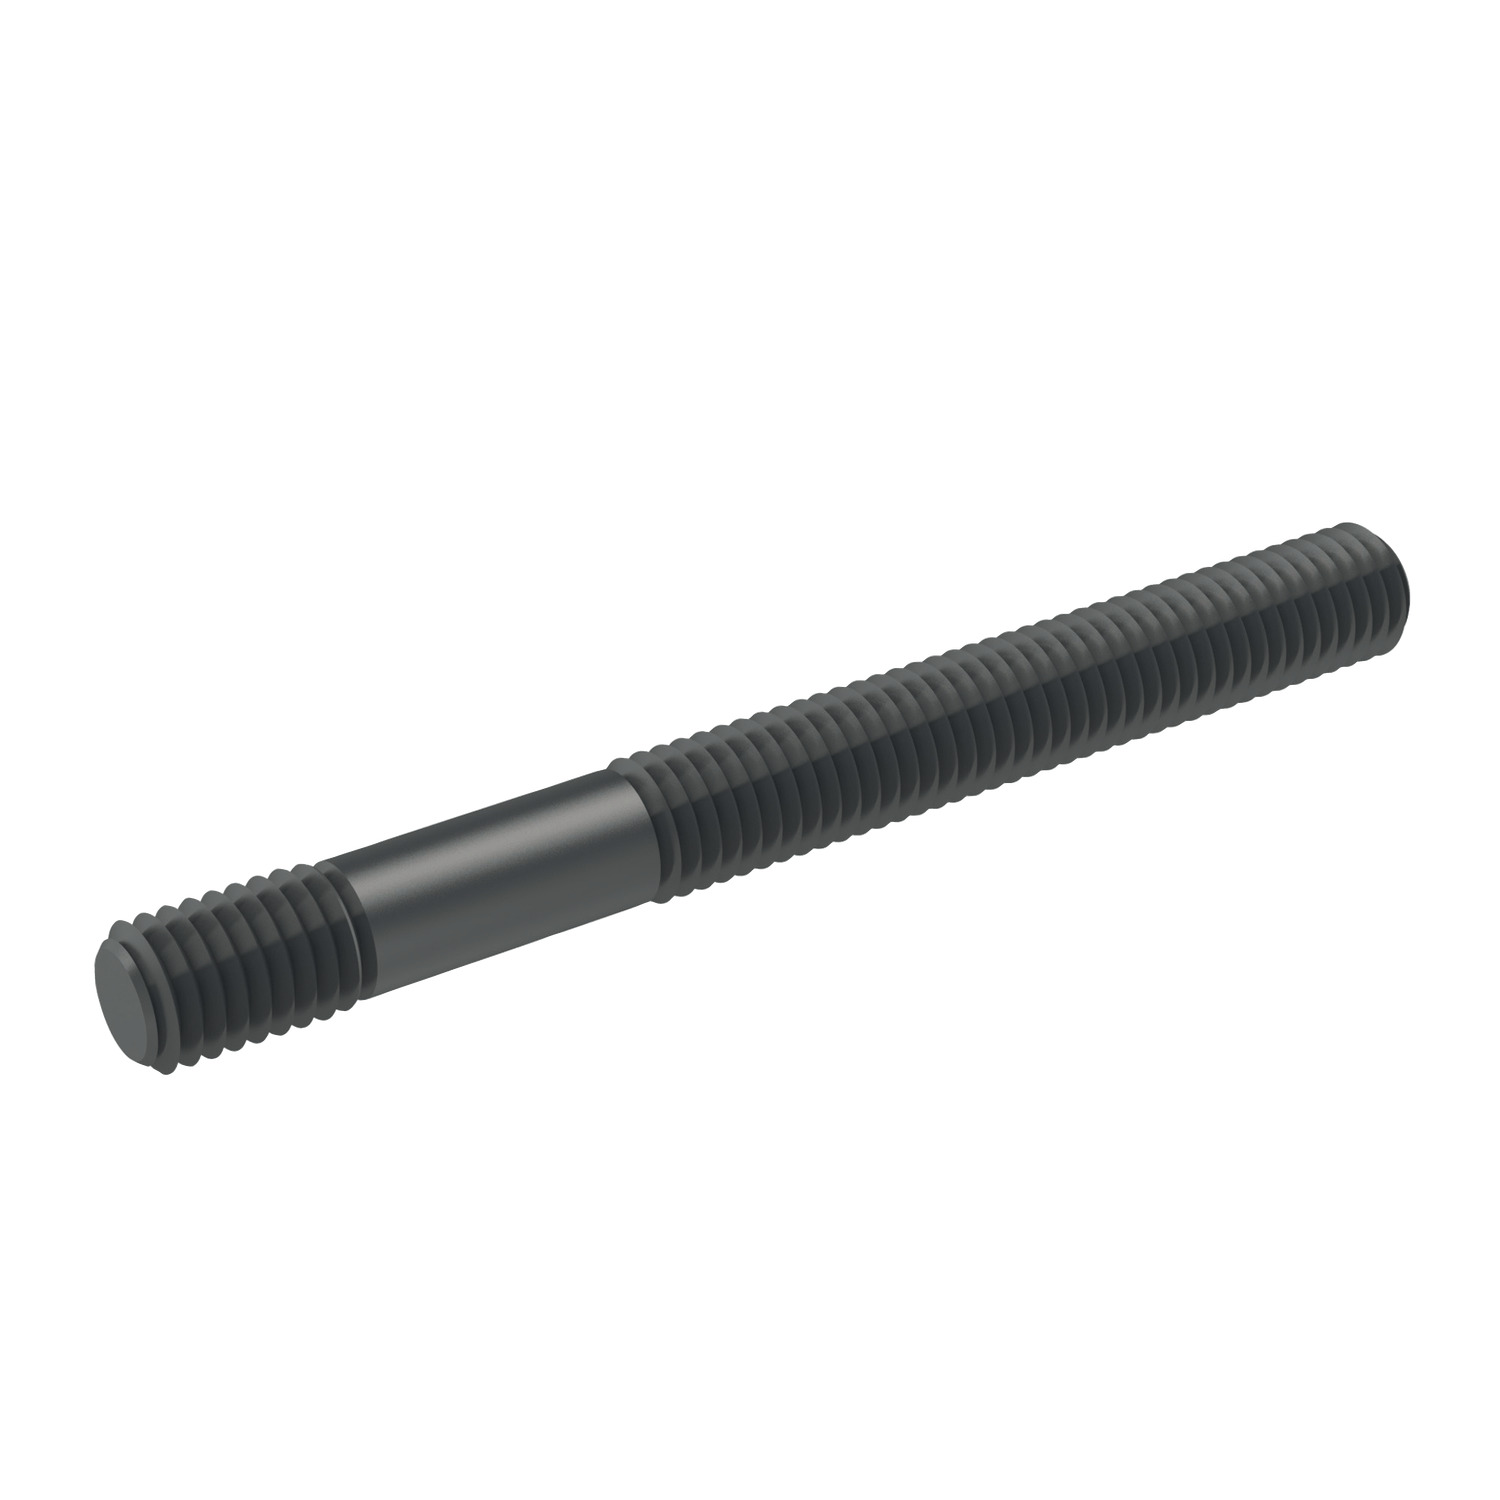 Studs Studs, strength class 8,8/10,9. Forged steel, rolled thread, heat-treated. Produced to DIN 6379.